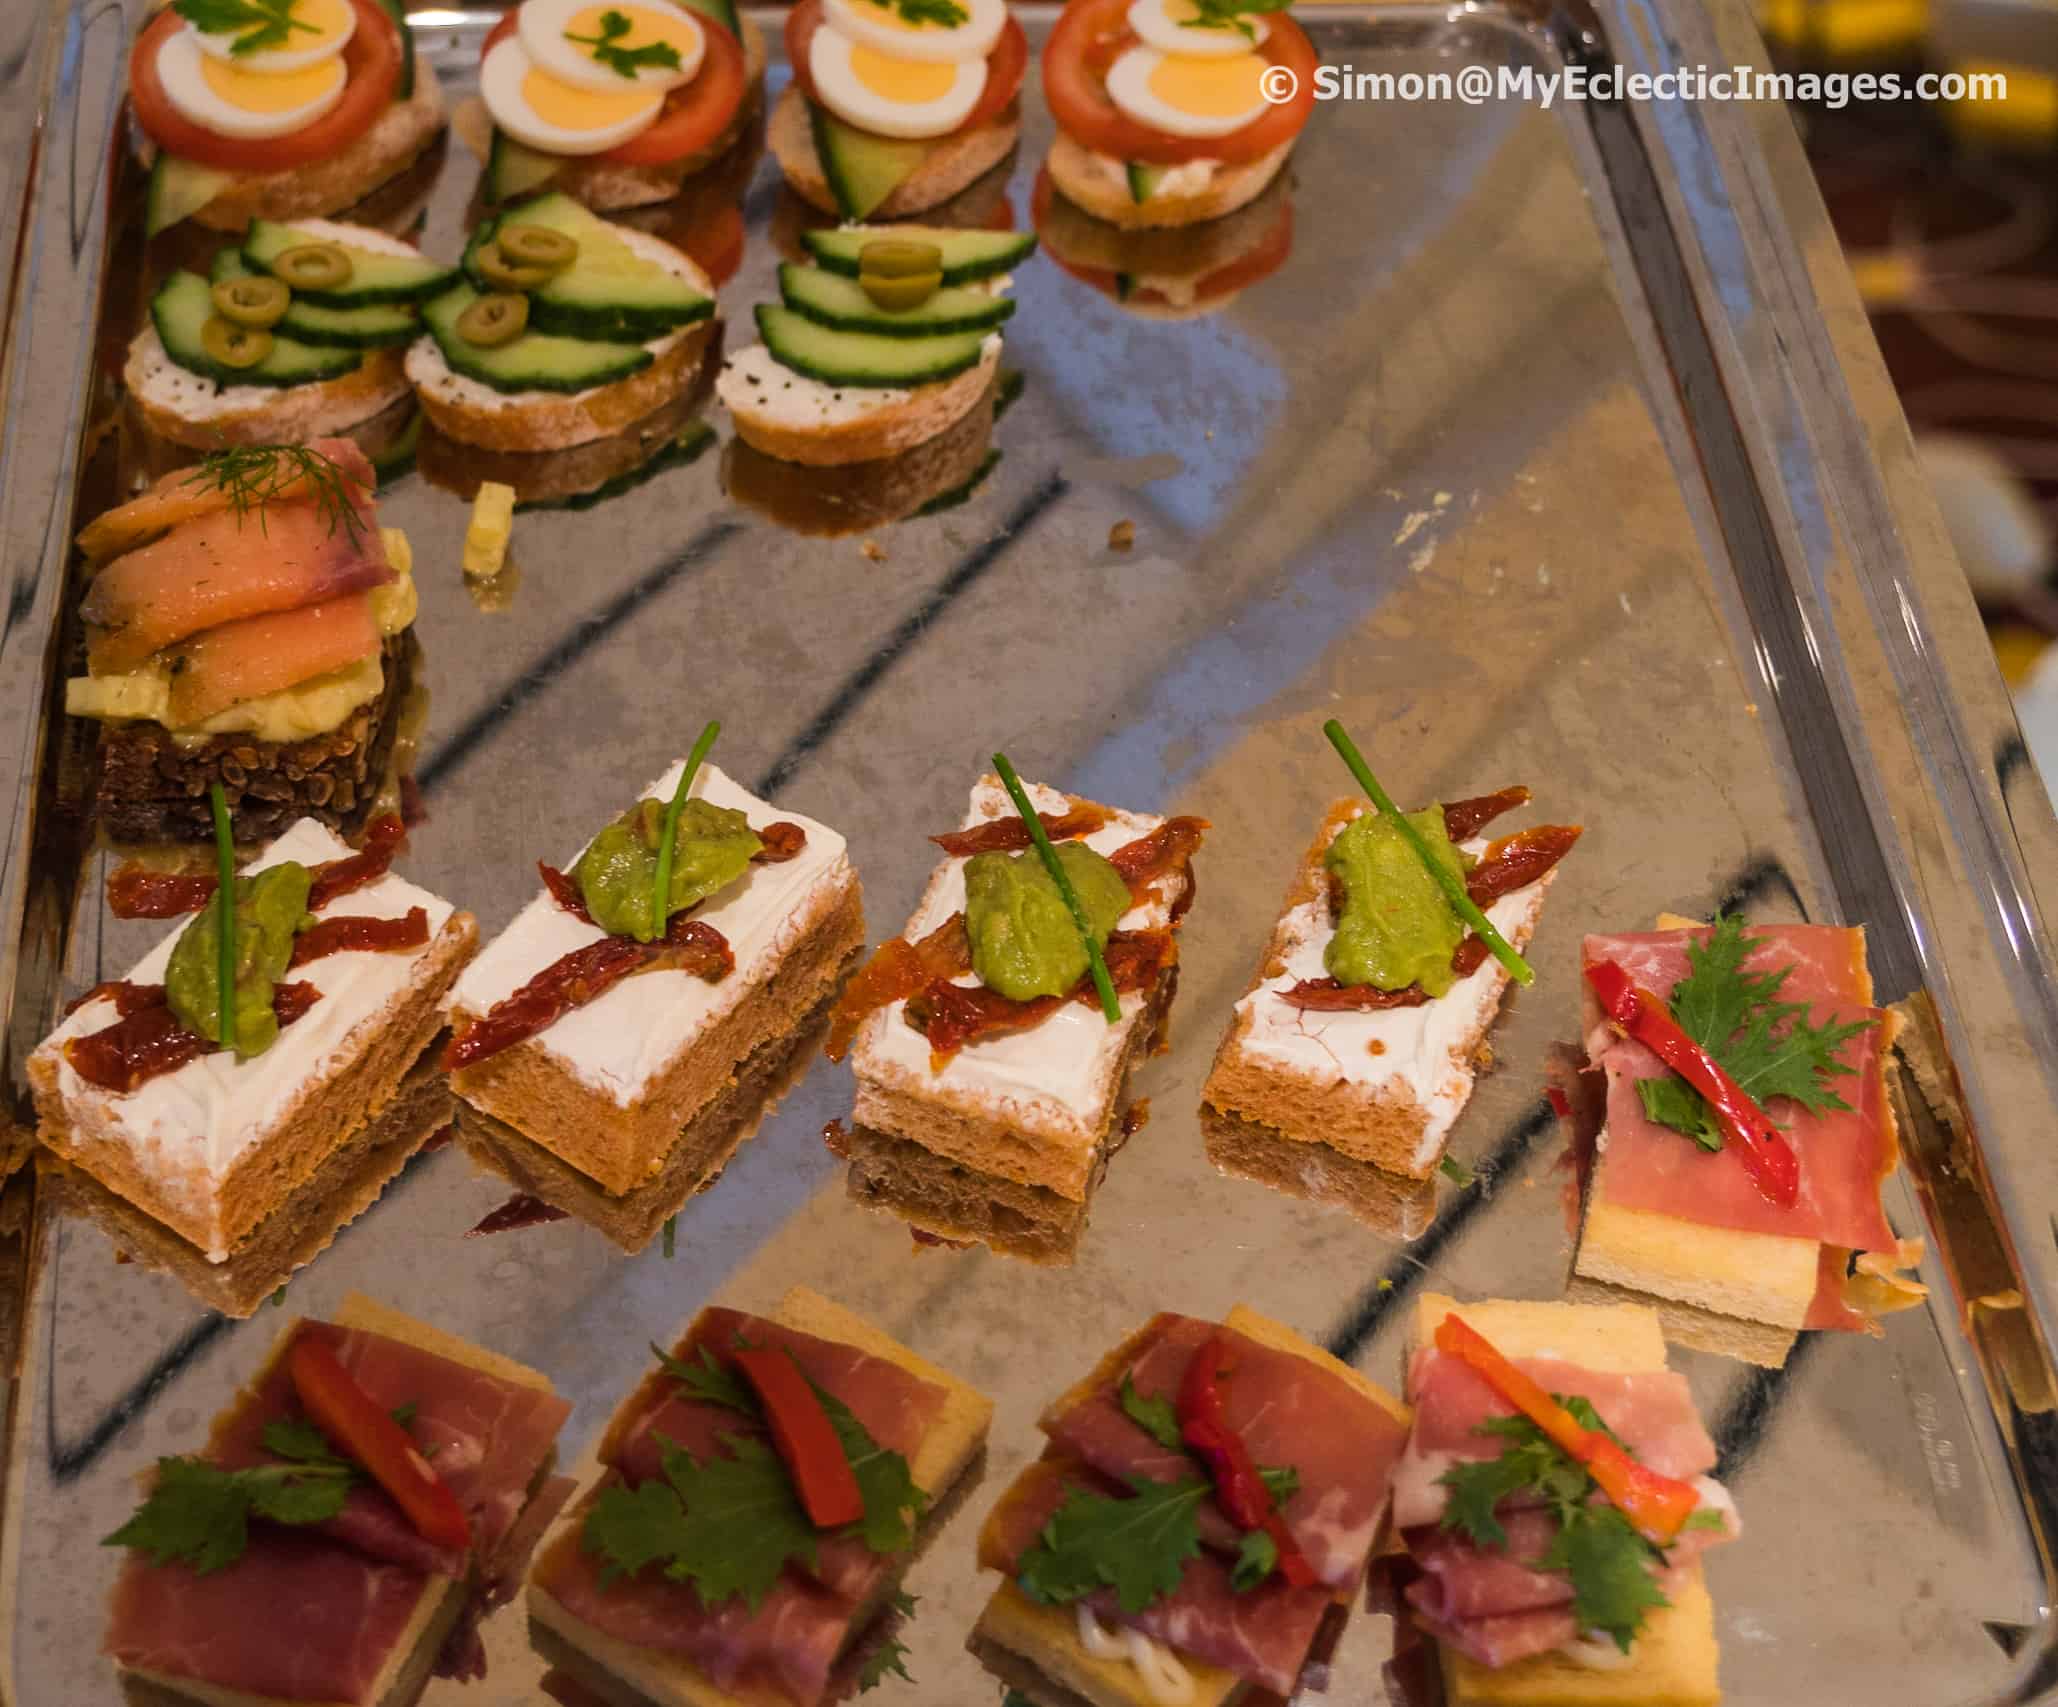 Sandwiches Served for Afternoon Tea Aboard the Nieuw Statendam